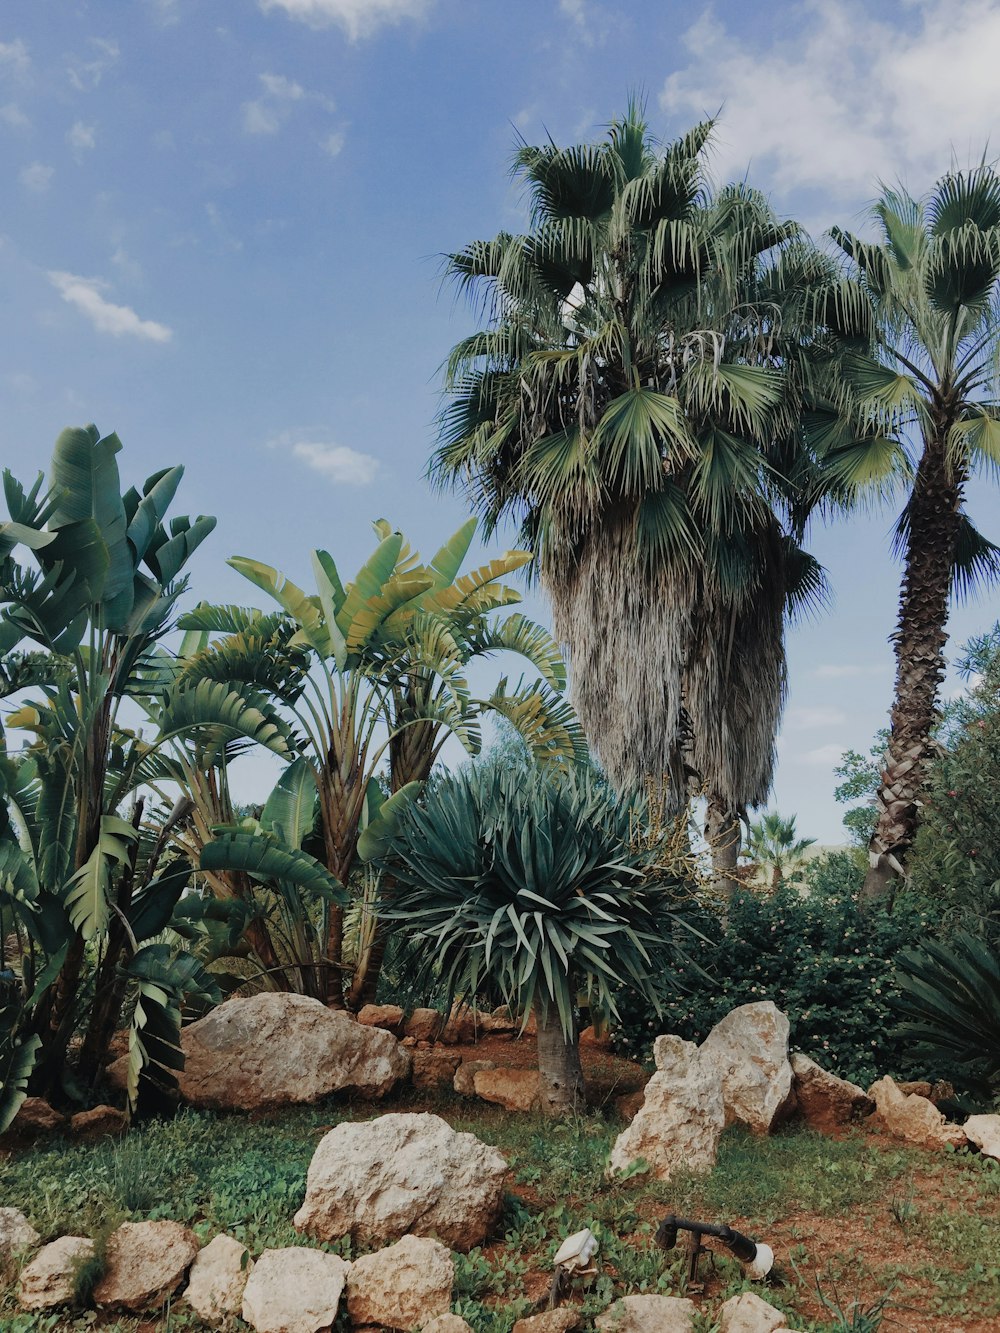 a group of palm trees sitting next to a lush green field